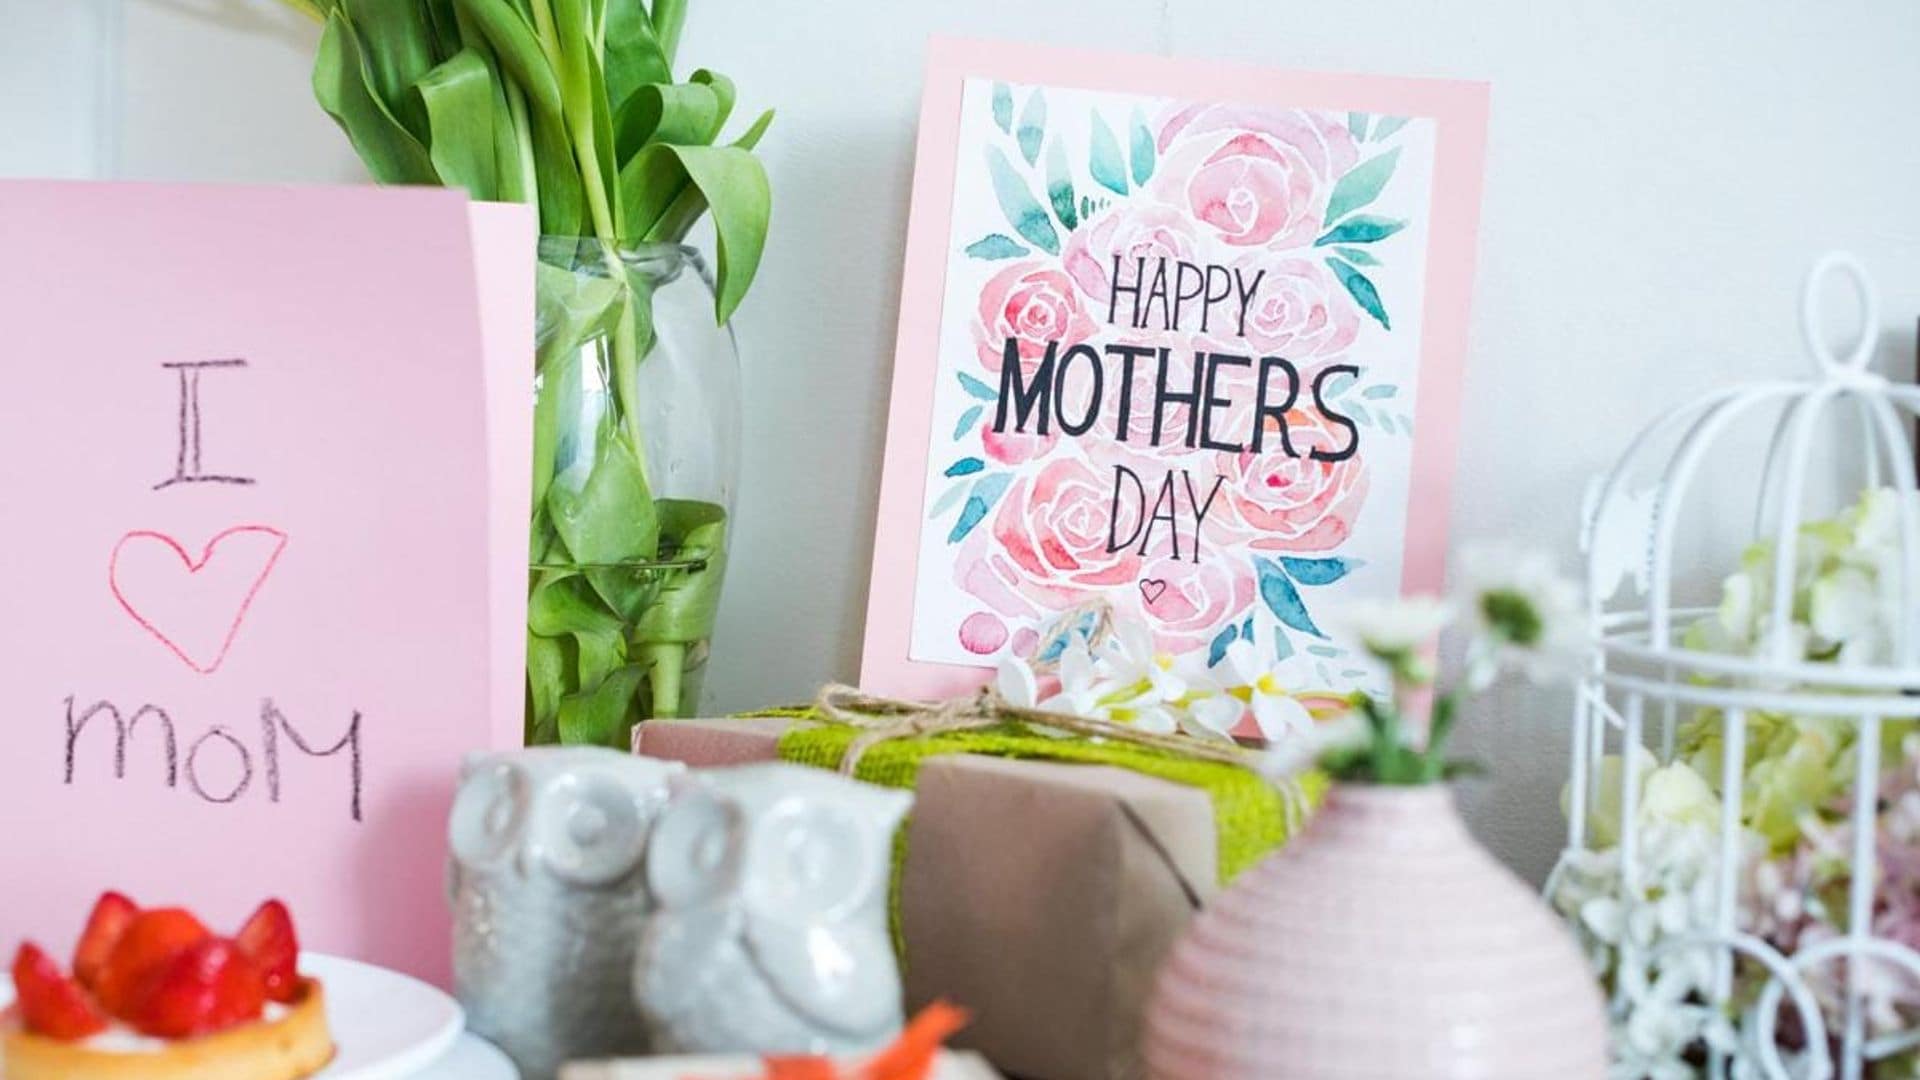 Make Her Day: Best mother’s day gifts that will make her feel special